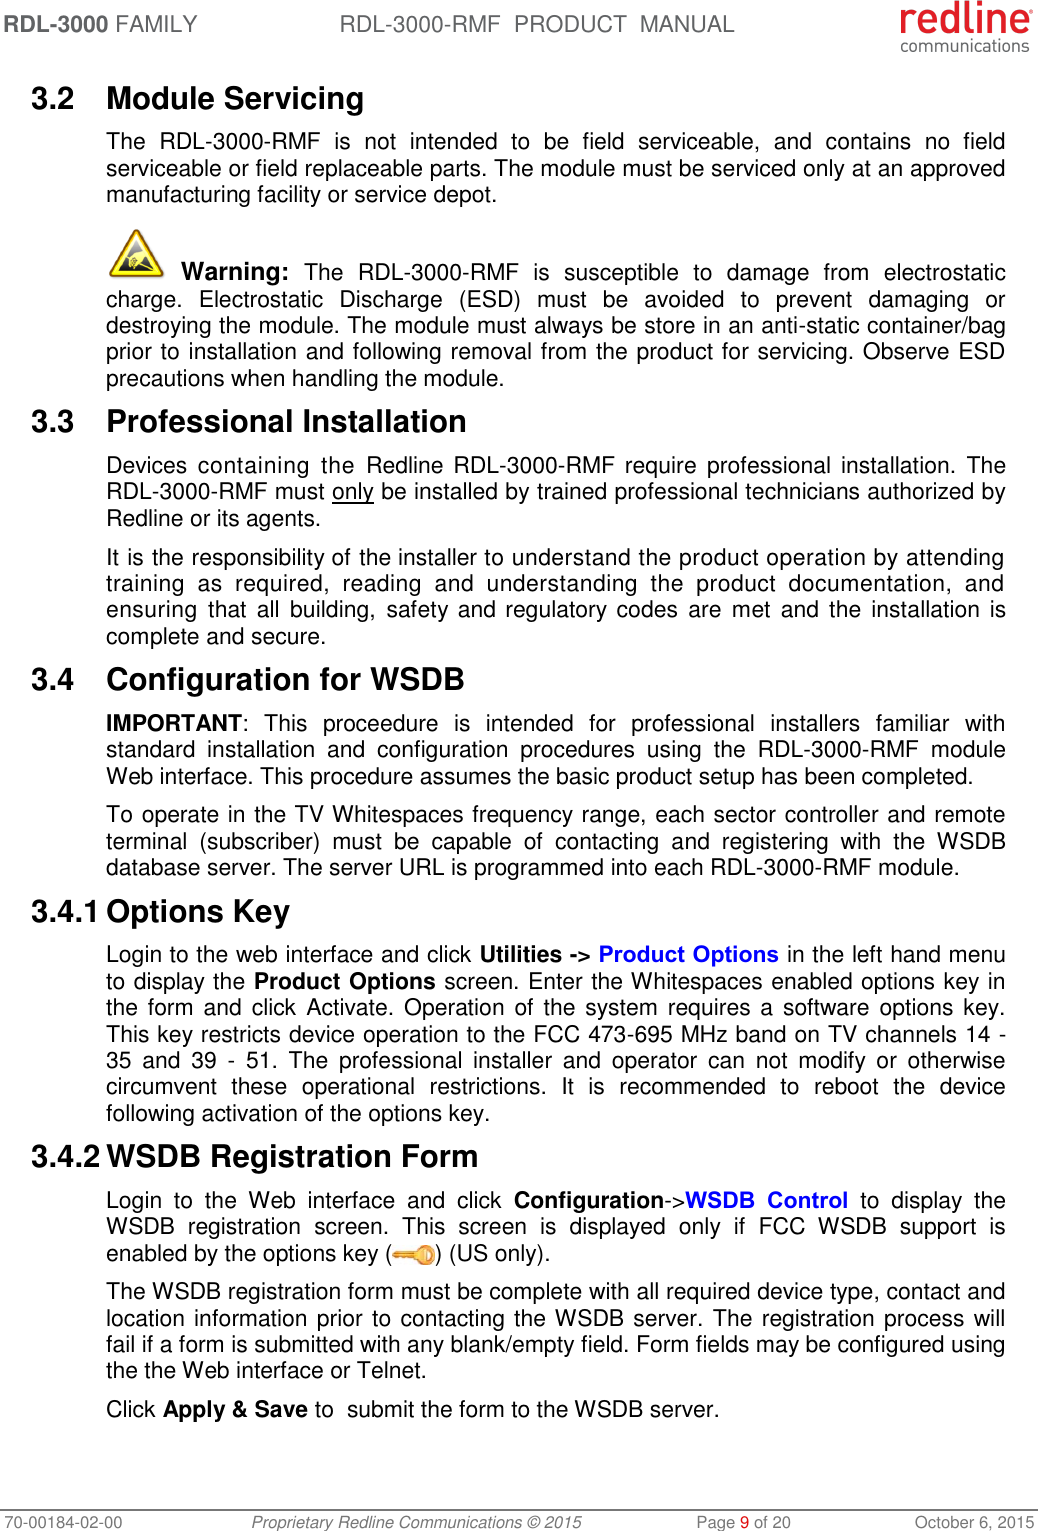 RDL-3000 FAMILY RDL-3000-RMF  PRODUCT  MANUAL 70-00184-02-00 Proprietary Redline Communications © 2015  Page 9 of 20  October 6, 2015 3.2  Module Servicing The  RDL-3000-RMF  is  not  intended  to  be  field  serviceable,  and  contains  no  field serviceable or field replaceable parts. The module must be serviced only at an approved manufacturing facility or service depot.  Warning:  The  RDL-3000-RMF  is  susceptible  to  damage  from  electrostatic charge.  Electrostatic  Discharge  (ESD)  must  be  avoided  to  prevent  damaging  or destroying the module. The module must always be store in an anti-static container/bag prior to installation and following removal from the product for servicing. Observe ESD precautions when handling the module. 3.3  Professional Installation Devices  containing  the  Redline RDL-3000-RMF require  professional installation.  The RDL-3000-RMF must only be installed by trained professional technicians authorized by Redline or its agents. It is the responsibility of the installer to understand the product operation by attending training  as  required,  reading  and  understanding  the  product  documentation,  and ensuring that  all  building, safety and regulatory codes  are  met and  the  installation is complete and secure. 3.4  Configuration for WSDB IMPORTANT:  This  proceedure  is  intended  for  professional  installers  familiar  with standard  installation  and  configuration  procedures  using  the  RDL-3000-RMF  module Web interface. This procedure assumes the basic product setup has been completed. To operate in the TV Whitespaces frequency range, each sector controller and remote terminal  (subscriber)  must  be  capable  of  contacting  and  registering  with  the  WSDB database server. The server URL is programmed into each RDL-3000-RMF module. 3.4.1 Options Key Login to the web interface and click Utilities -&gt; Product Options in the left hand menu to display the Product Options screen. Enter the Whitespaces enabled options key in the form and click  Activate. Operation of the  system  requires  a software options key. This key restricts device operation to the FCC 473-695 MHz band on TV channels 14 - 35  and  39  -  51.  The  professional  installer  and  operator  can  not  modify  or  otherwise circumvent  these  operational  restrictions.  It  is  recommended  to  reboot  the  device following activation of the options key. 3.4.2 WSDB Registration Form Login  to  the  Web  interface  and  click  Configuration-&gt;WSDB  Control  to  display  the WSDB  registration  screen.  This  screen  is  displayed  only  if  FCC  WSDB  support  is enabled by the options key ( ) (US only). The WSDB registration form must be complete with all required device type, contact and location information prior to contacting the WSDB server. The registration process will fail if a form is submitted with any blank/empty field. Form fields may be configured using the the Web interface or Telnet. Click Apply &amp; Save to  submit the form to the WSDB server. 